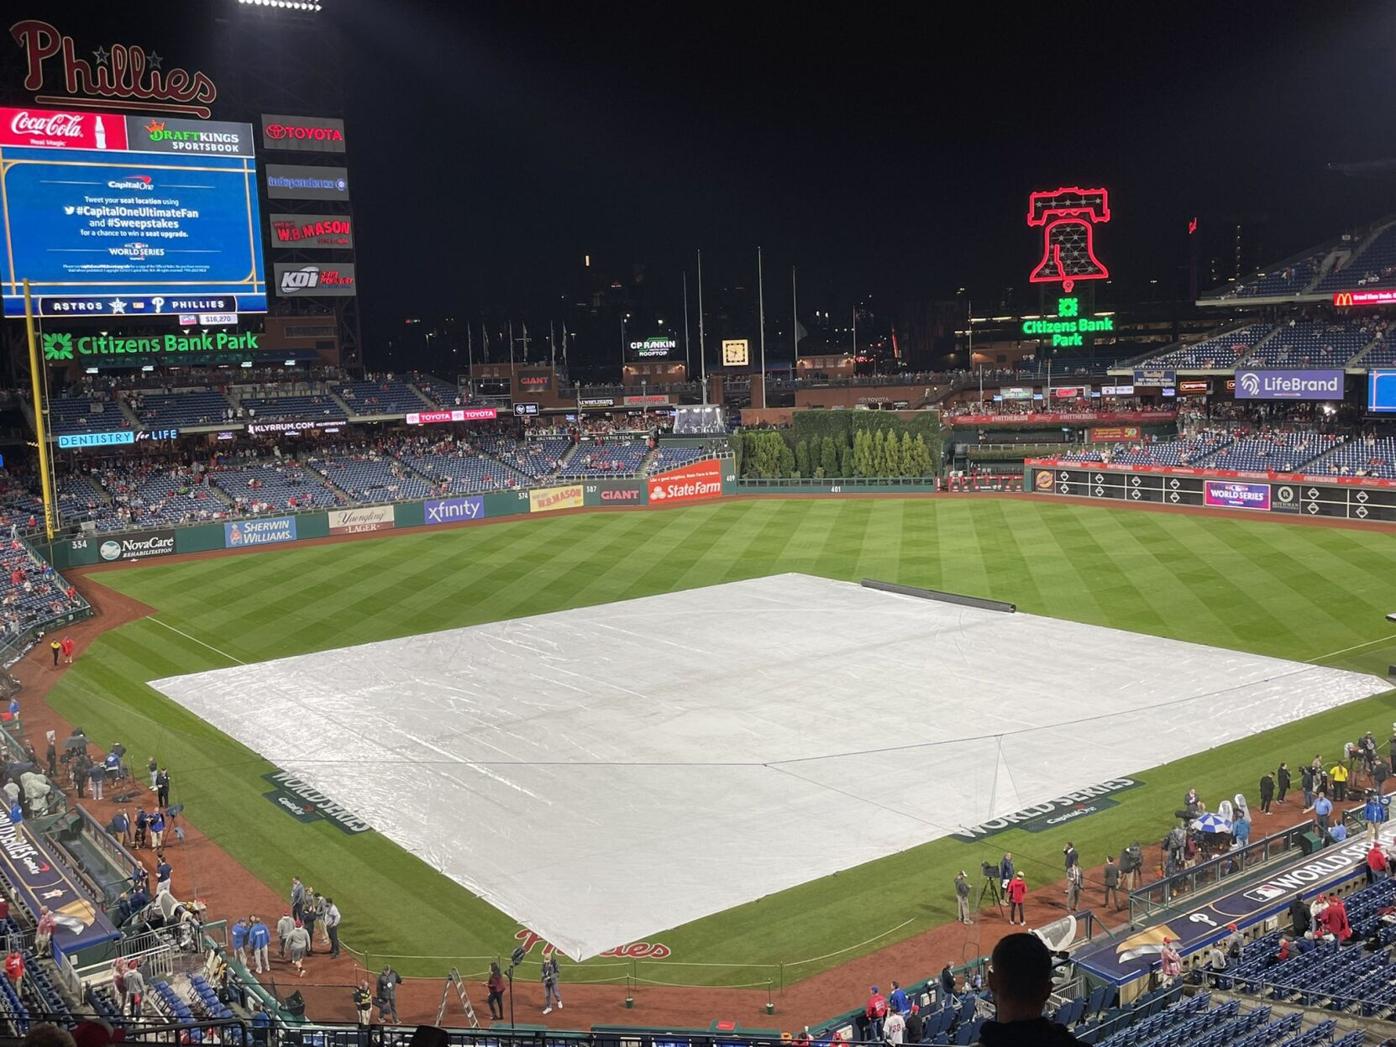 2022 World Series: Game 3 between Phillies-Astros postponed due to